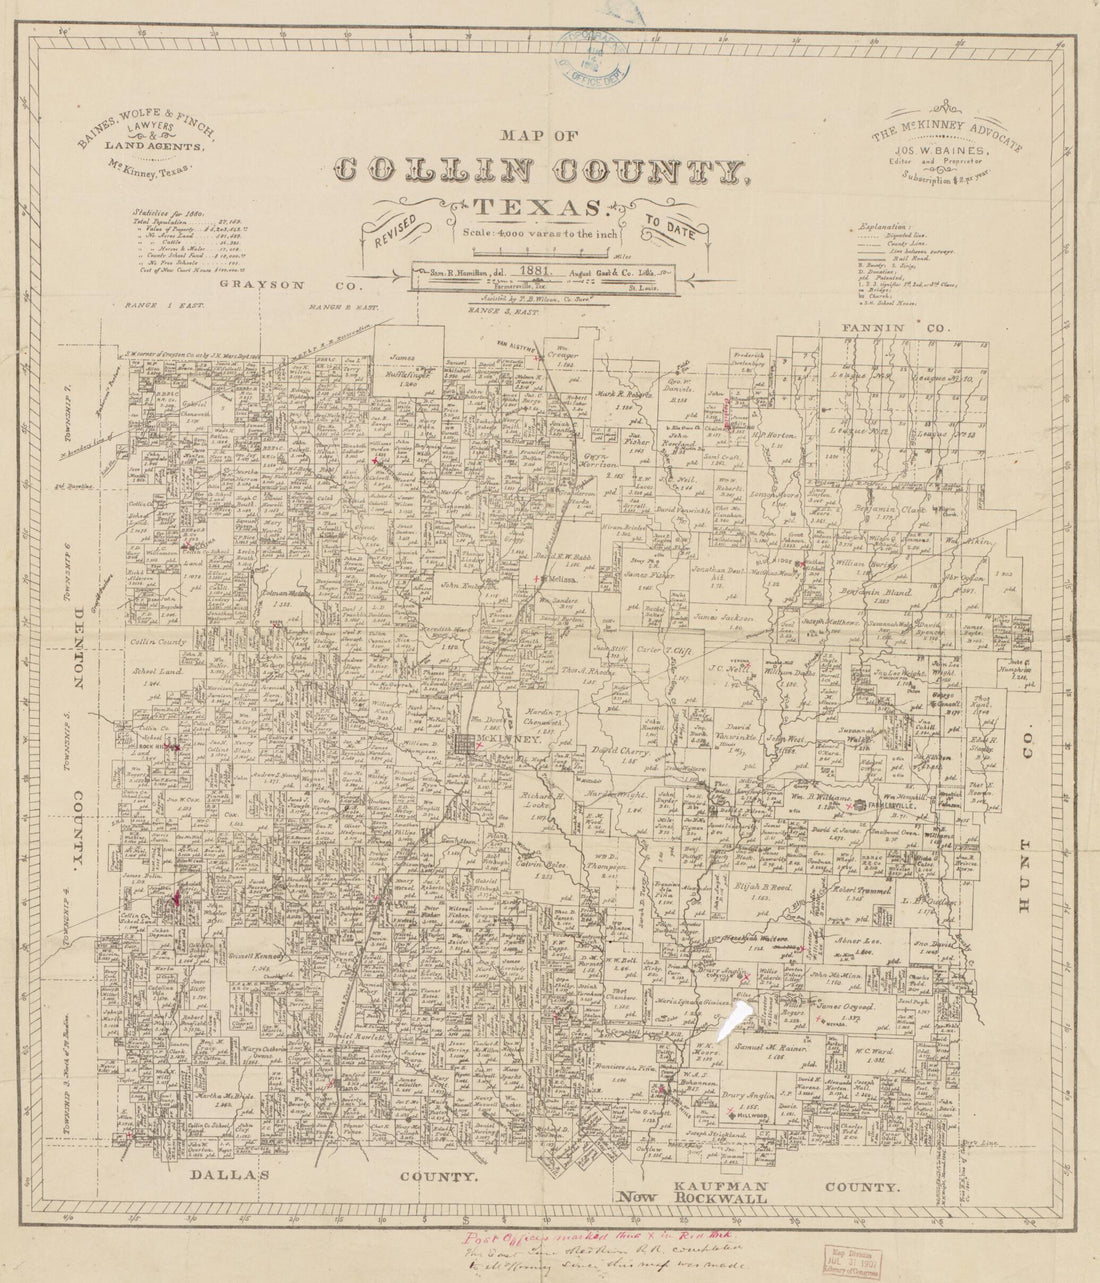 This old map of Map of Collin County, Texas from 1881 was created by  August Gast &amp; Co, Sam. R. Hamilton, T. B. Wilson in 1881